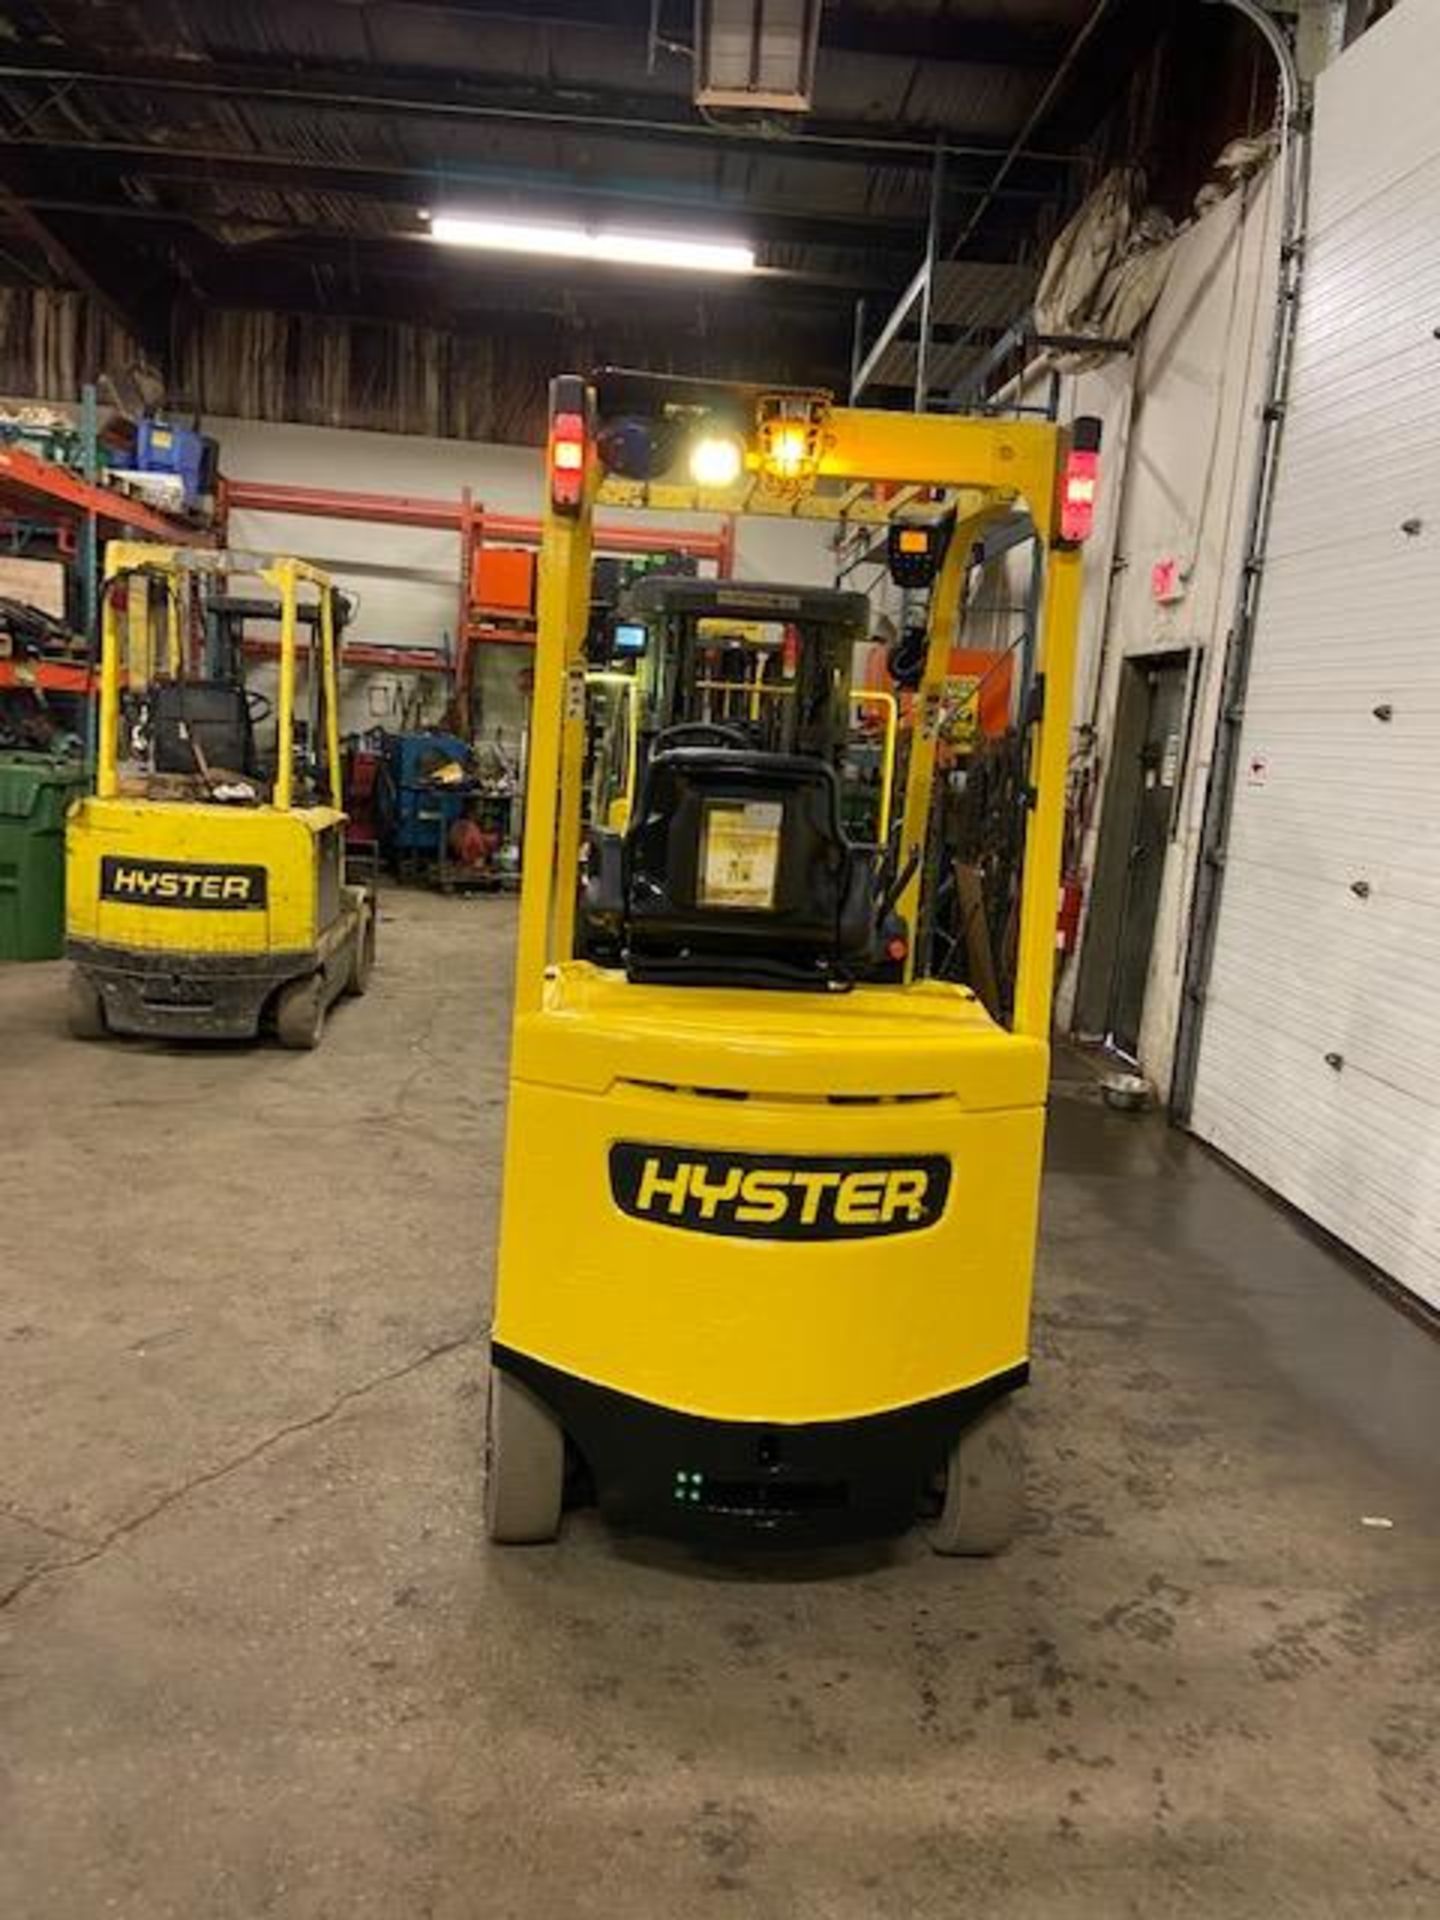 FREE CUSTOMS - 2016 Hyster 5000lbs Capacity Forklift SAFETY INTO 2021 Electric with 3-STAGE MAST - Image 3 of 3